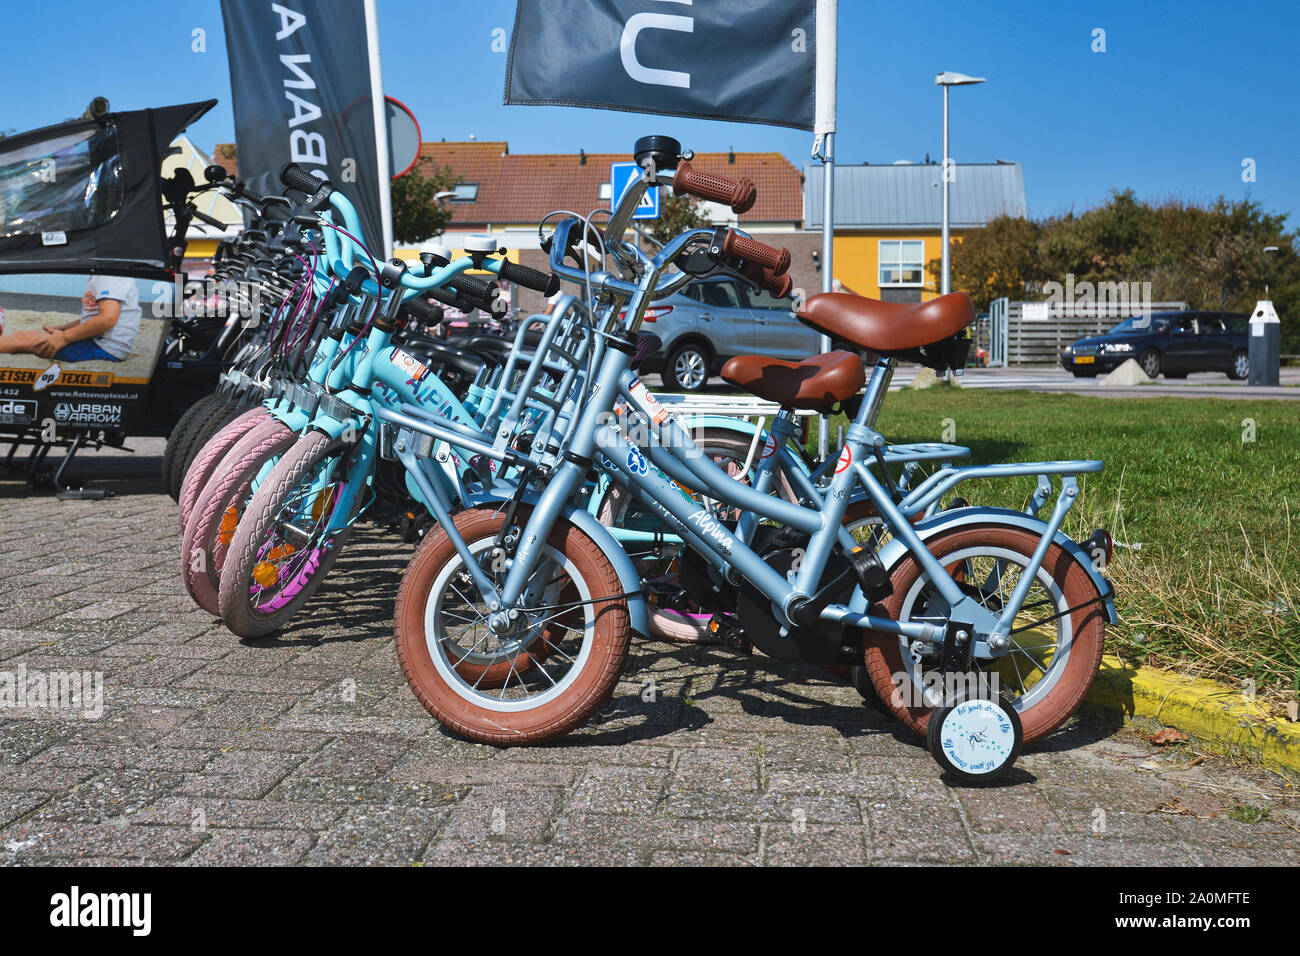 De Koog, Texel / Netherlands - August 2019: Small blue bicycles with training wheels for children at bike renting station for tourists on island Texel Stock Photo